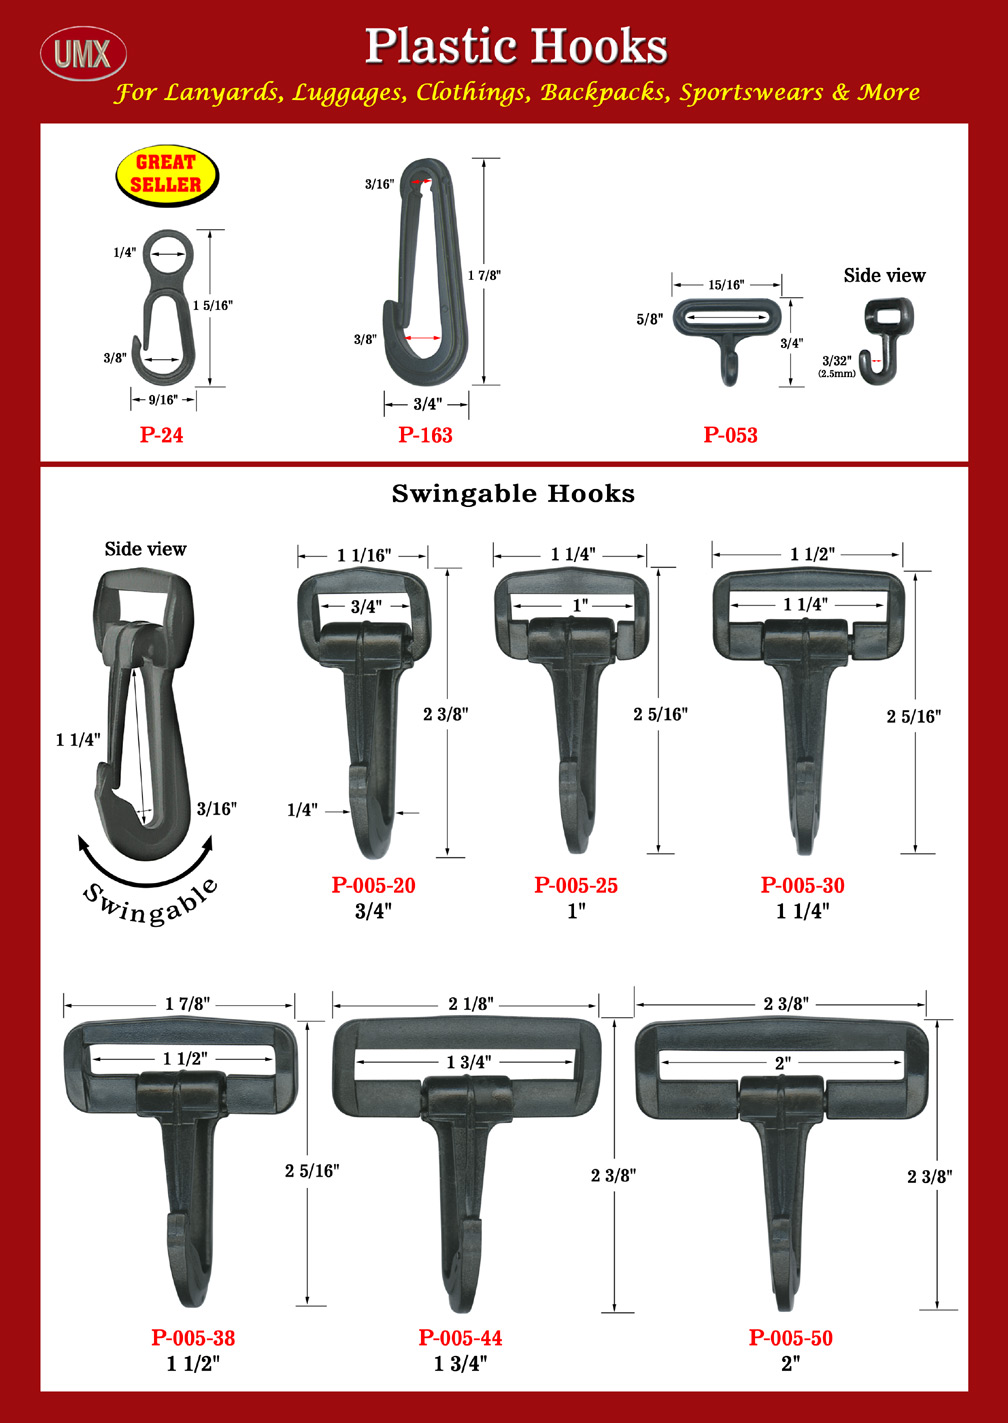 Overall View: Helpful Photo For 1/4" Round Hole Small Plastic Hooks: For Small Size Round or Flat Cords  Buyer